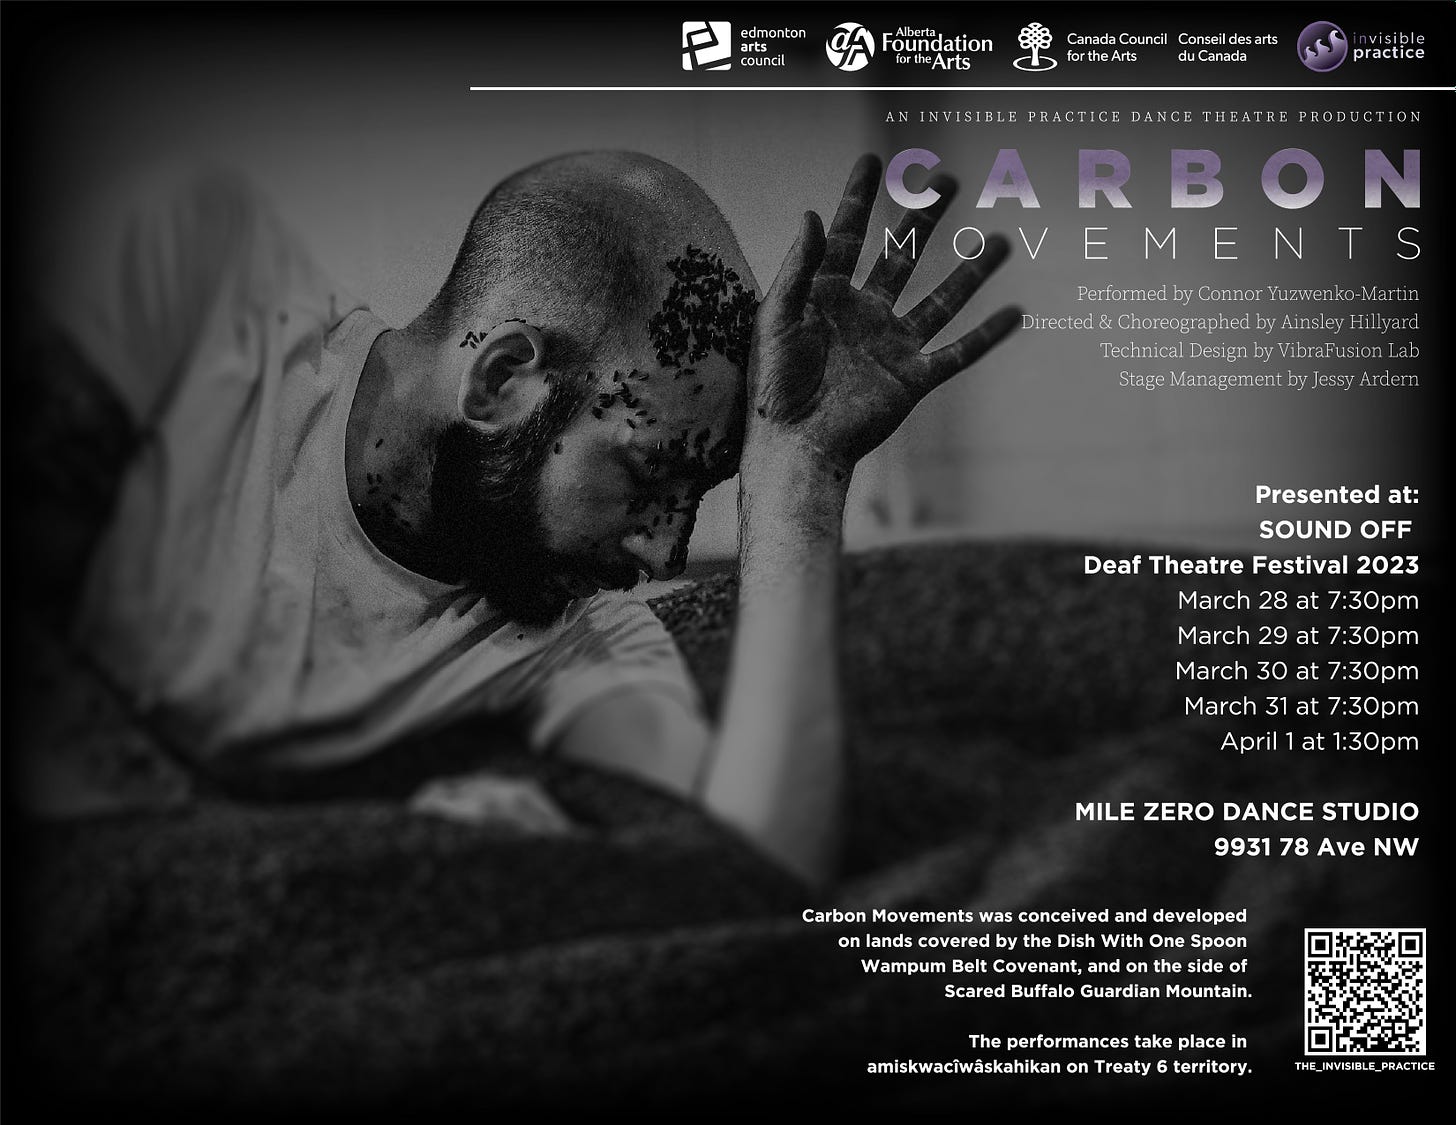 A landscape poster in black and white. Connor, a young white male with a short trimmed beard and close-shaven head, lays in a pile of black granular material. Some of it covers his face. One hand is outstretched in front of his face as he slightly leans against it with his forehead. Top edge shows logos for Edmonton Arts Council, Alberta Foundation for the Arts, Canada Council for the Arts, and The Invisible Practice. Other text on the poster is available throughout this email.